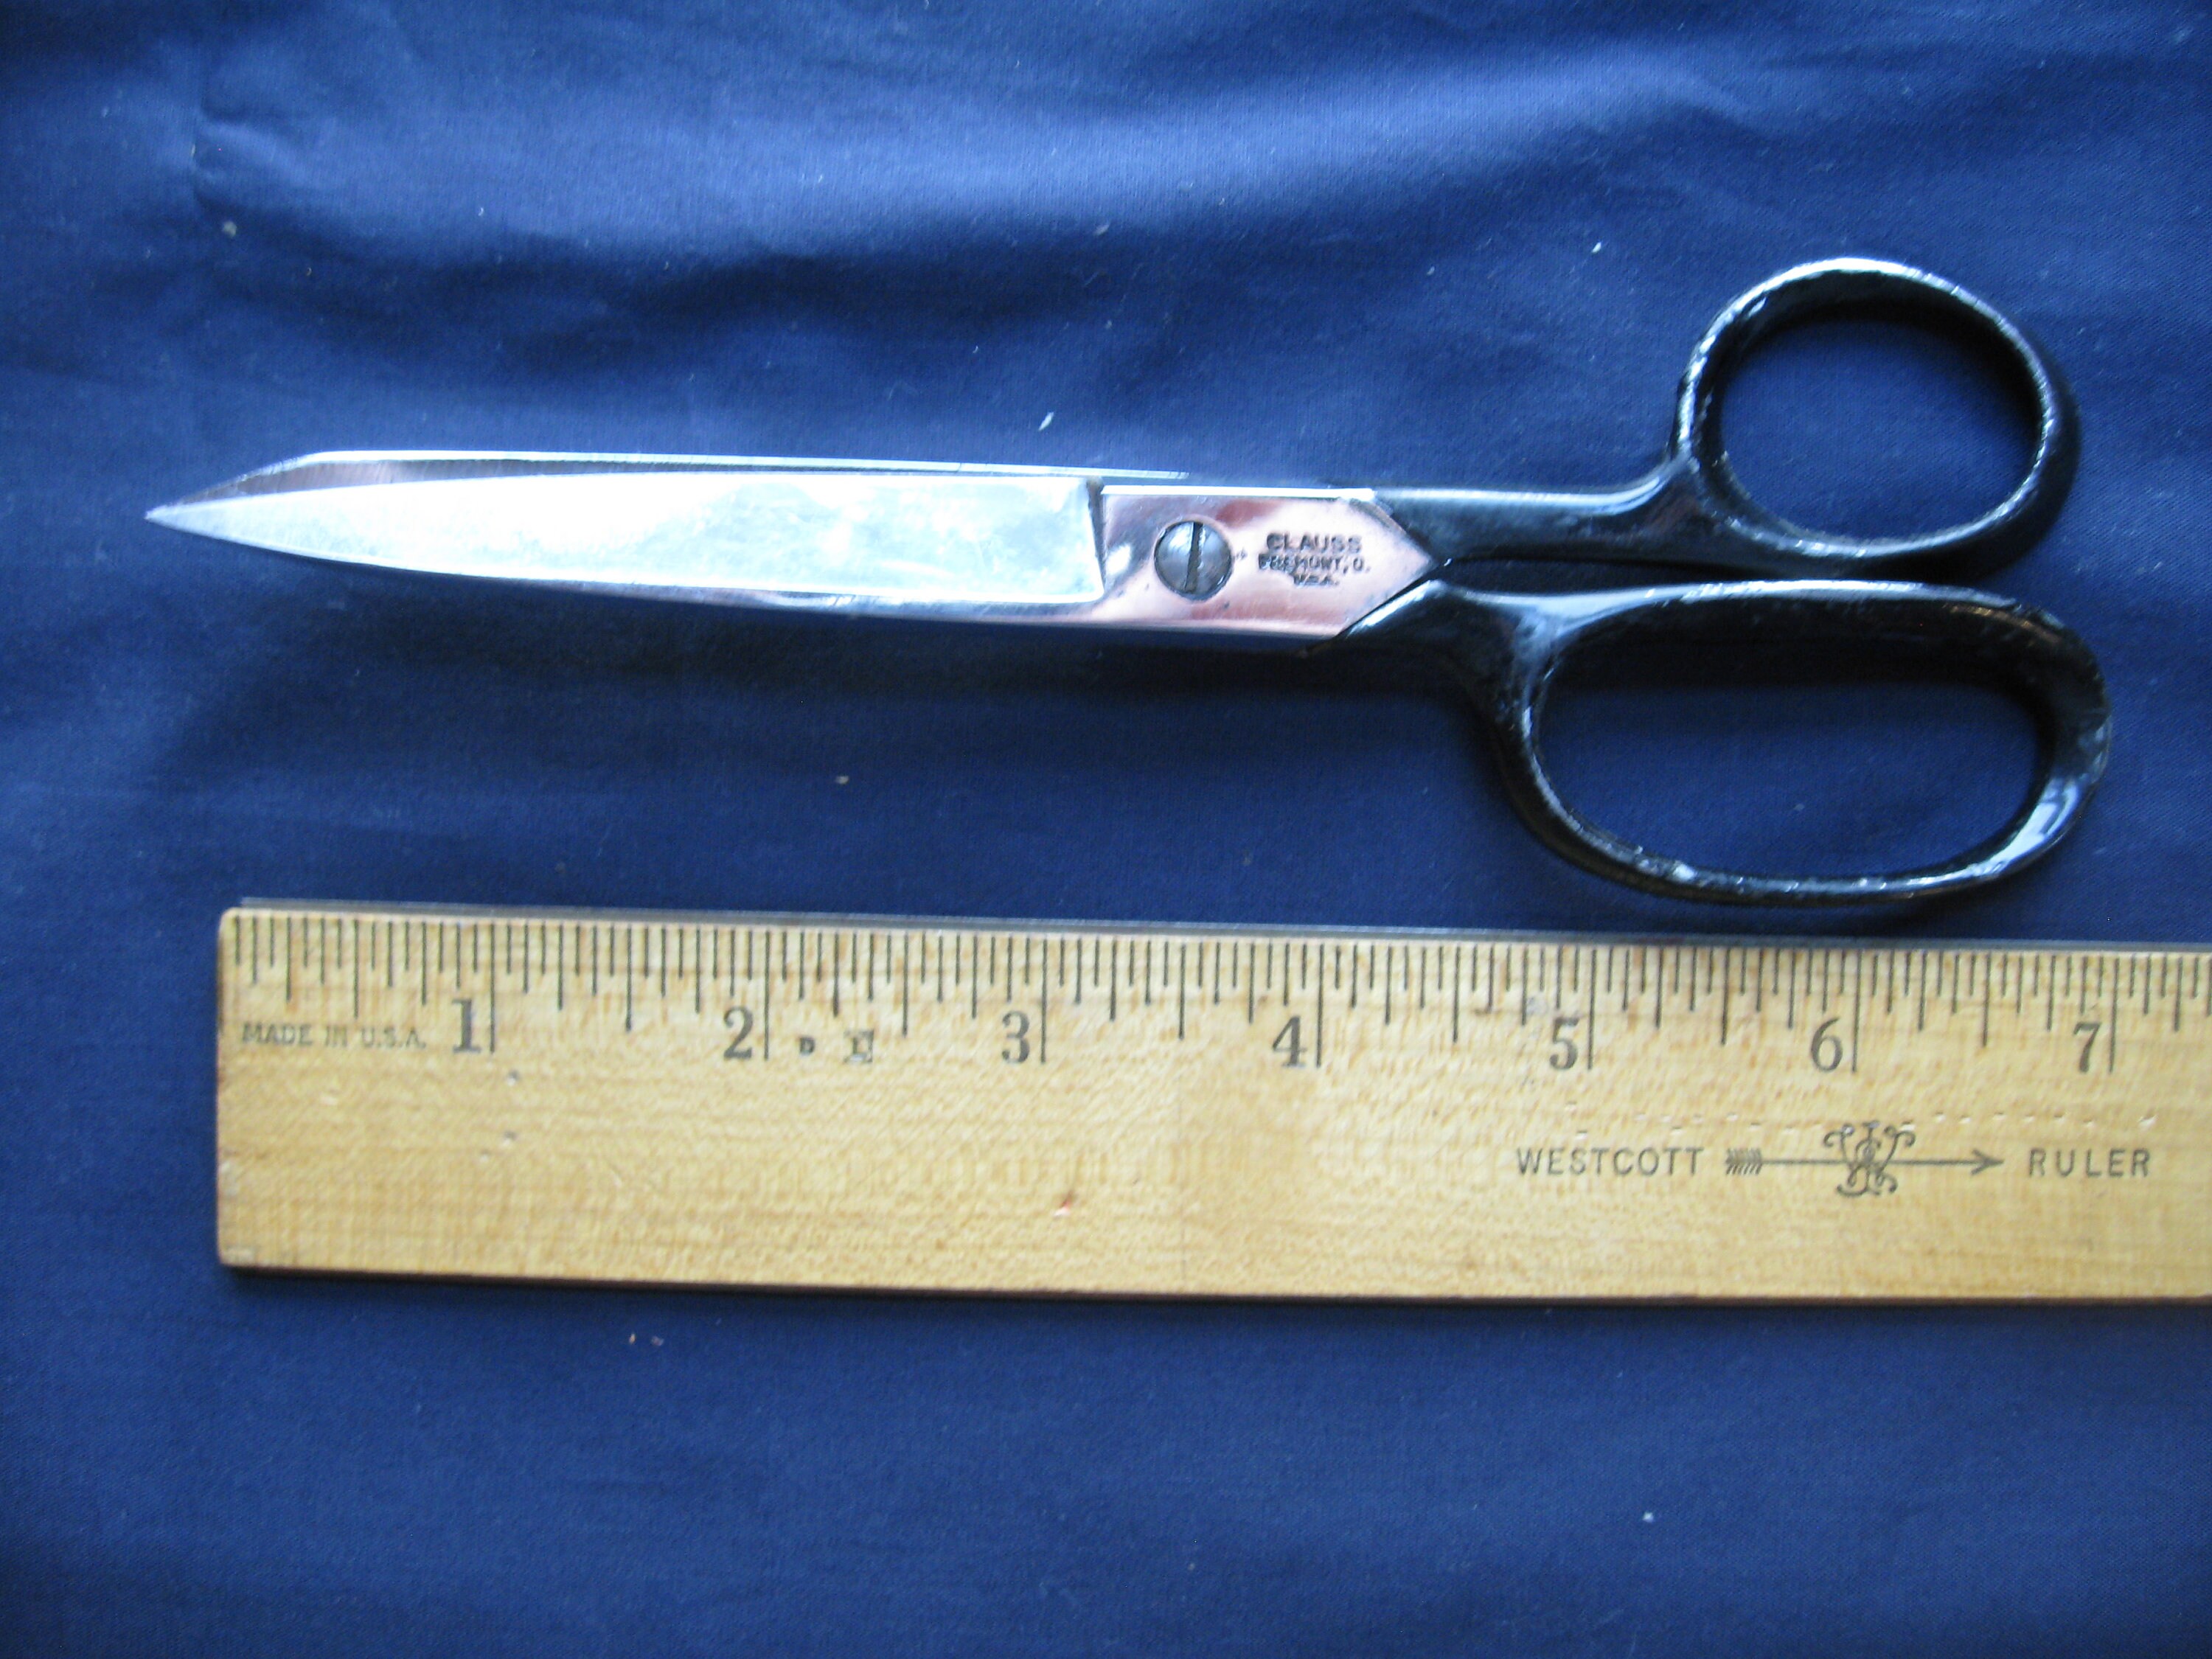 Small Vintage Clauss Sewing Scissors Authentic Vintage Little Scissors  Small Silver Metal Pair of Scissors 